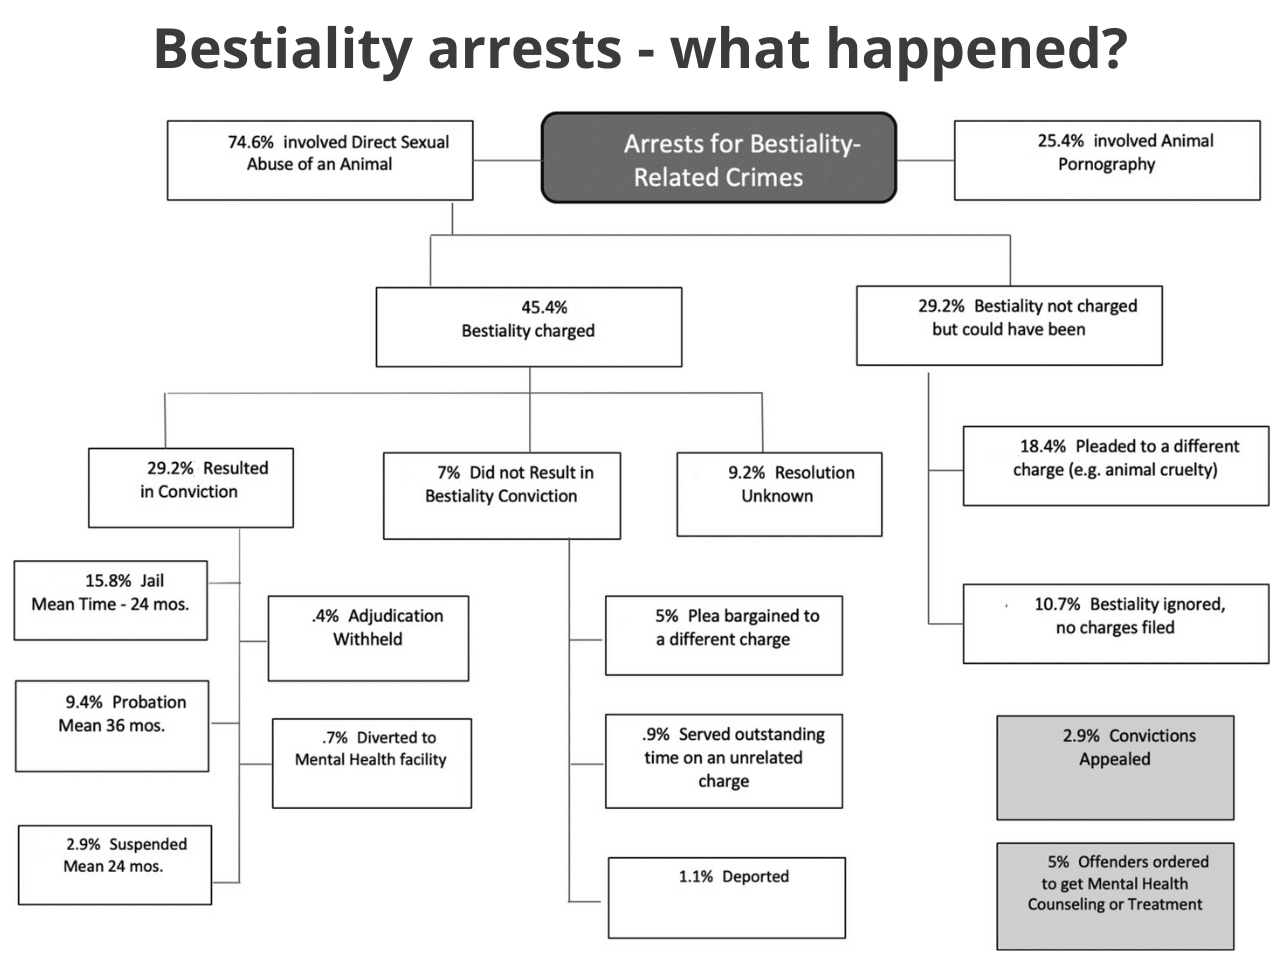 bestiality arrests statistics - what happens after the arrest for sex with an animal